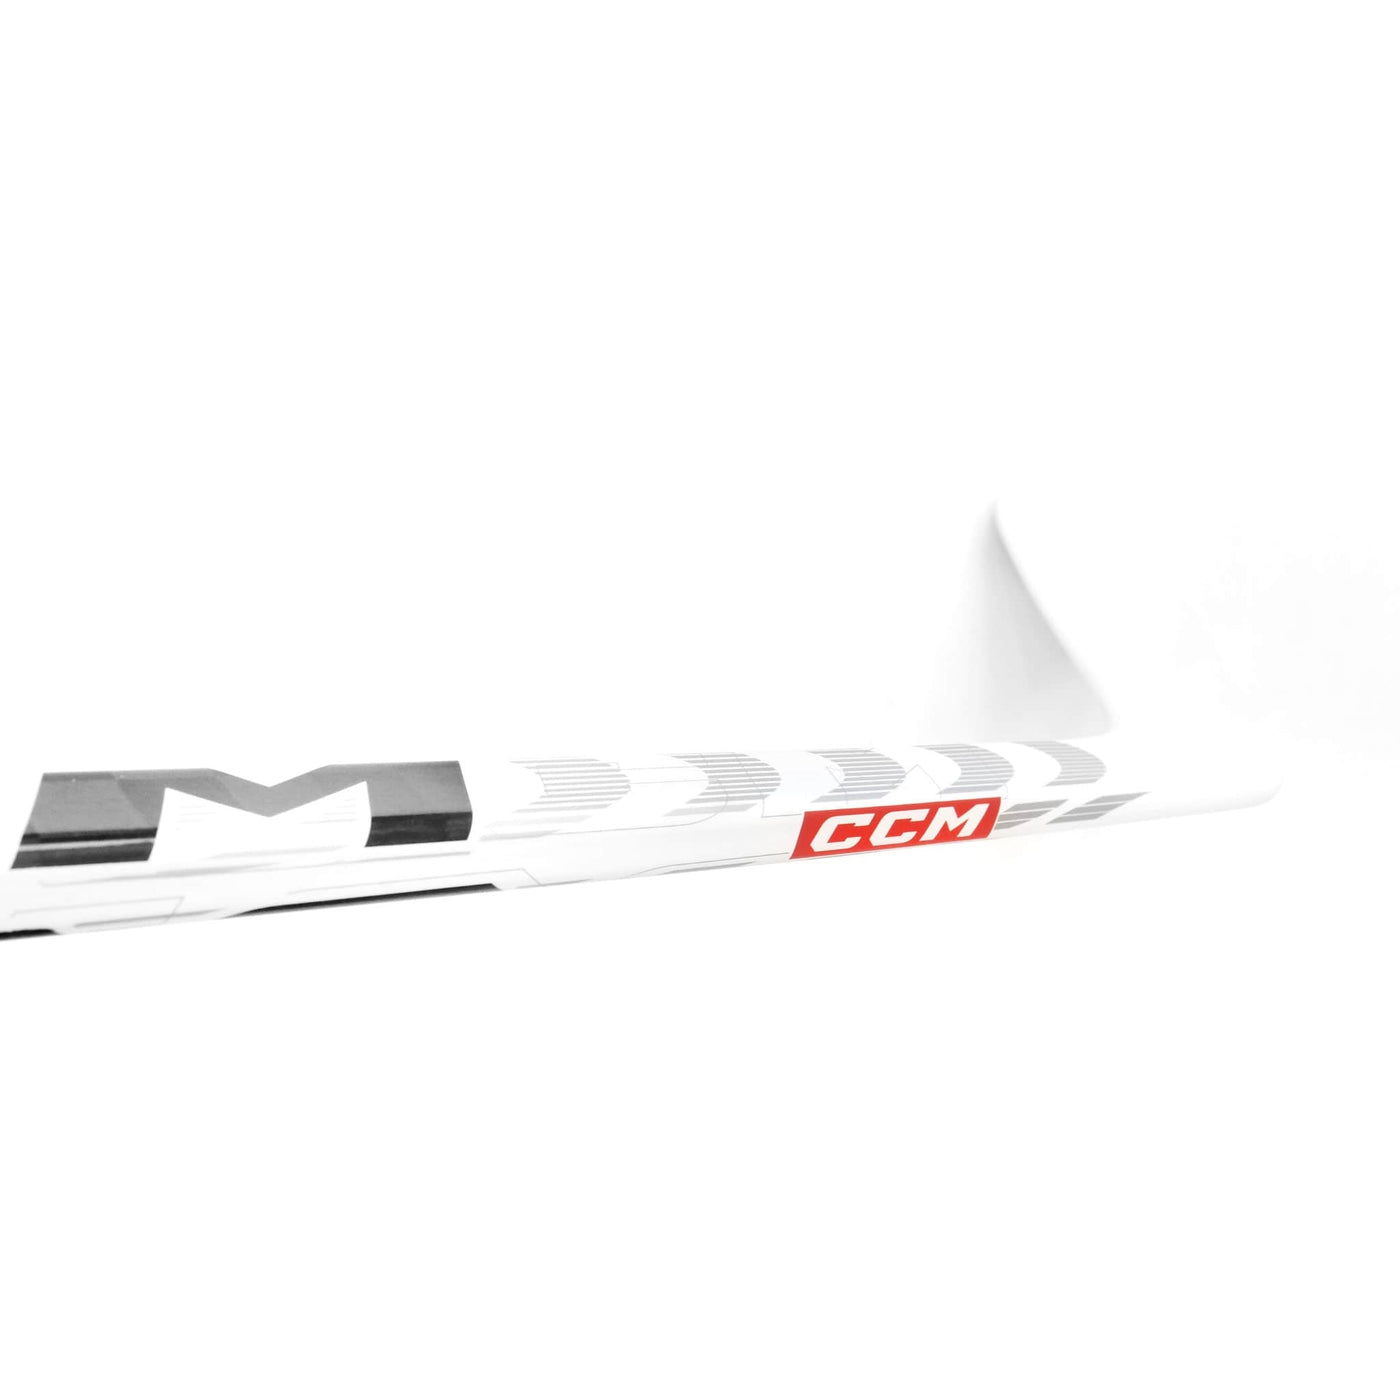 CCM Jetspeed FT5 Pro Intermediate Hockey Stick - North Limited Edition - The Hockey Shop Source For Sports